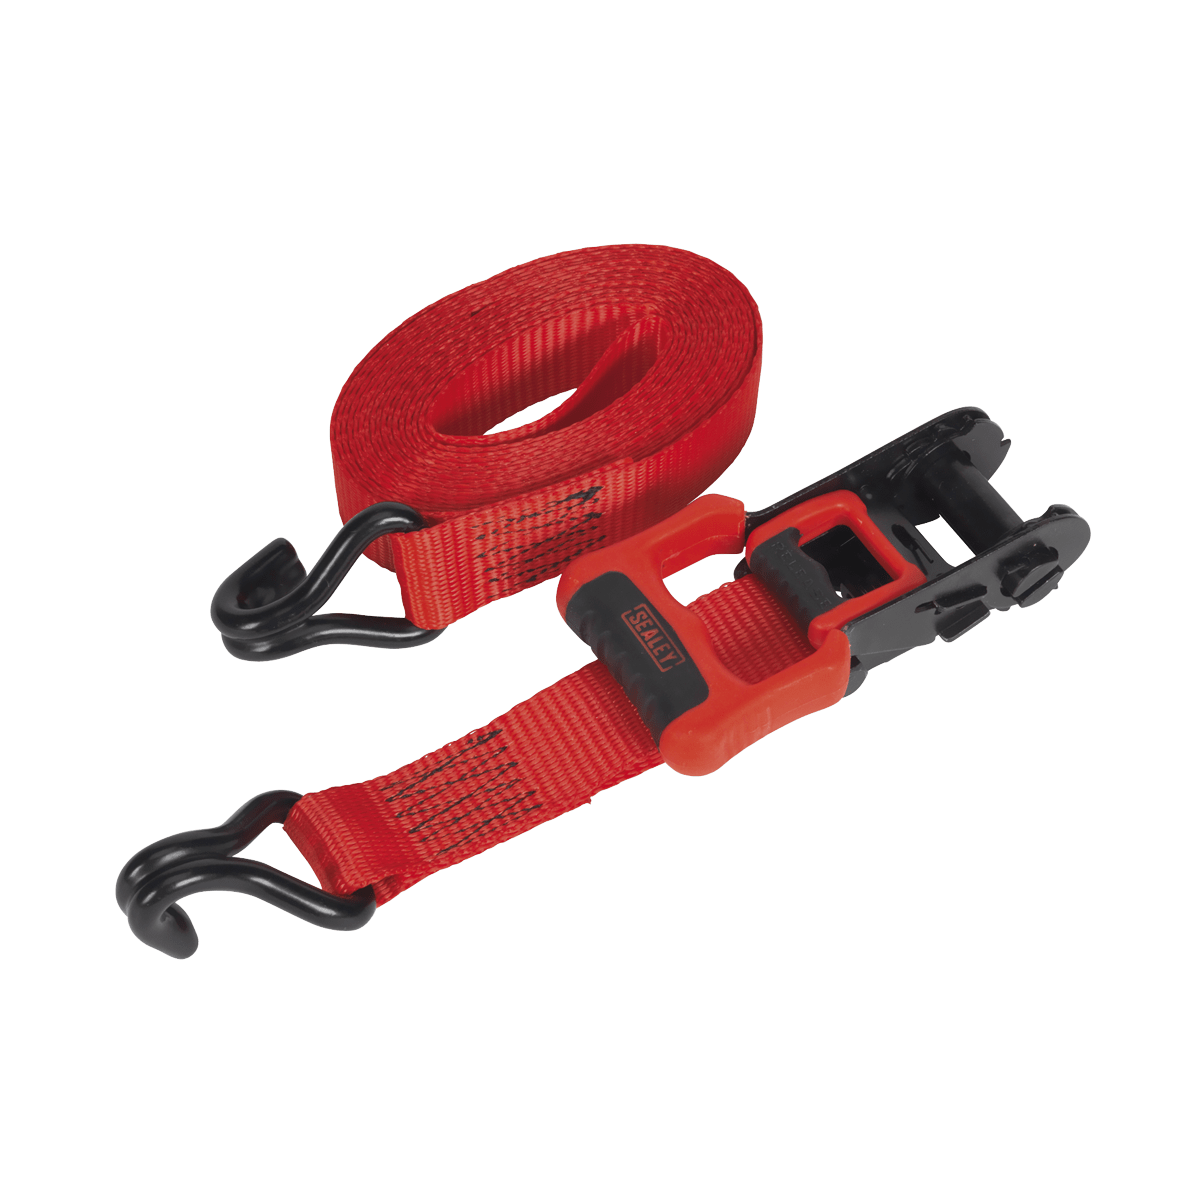 Sealey Ratchet Straps 32mm x 4.9m Polyester Webbing with J-Hooks 1200kg Breaking Strength - 2 Pairs